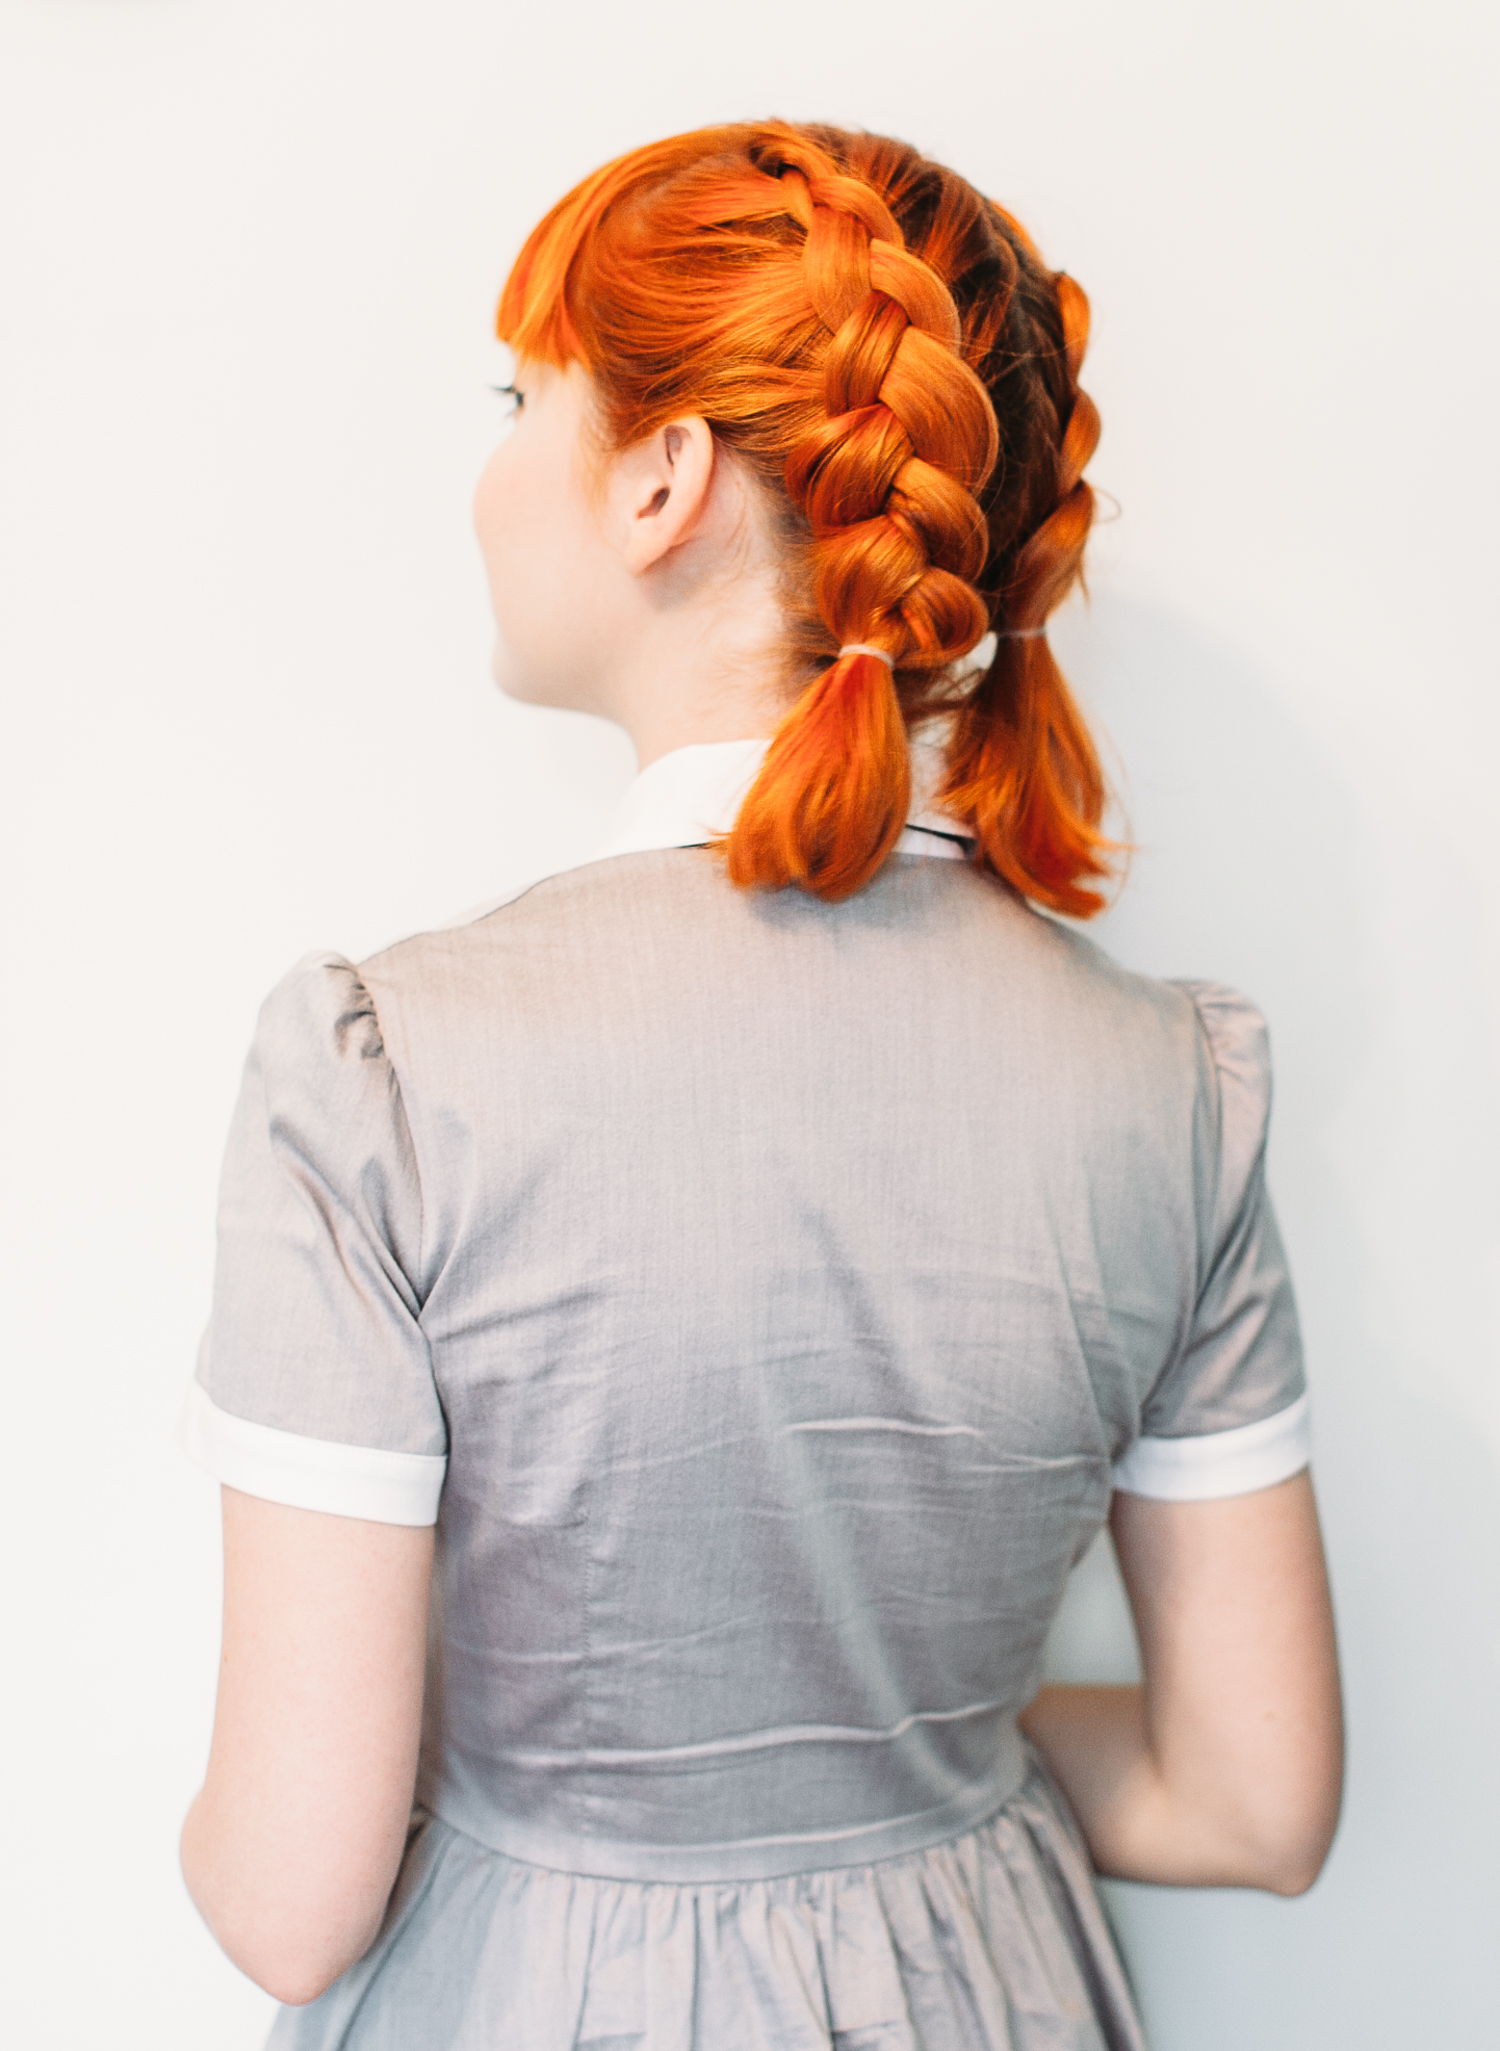 Double dutch pigtails for short hair (click-through for the full tutorial)